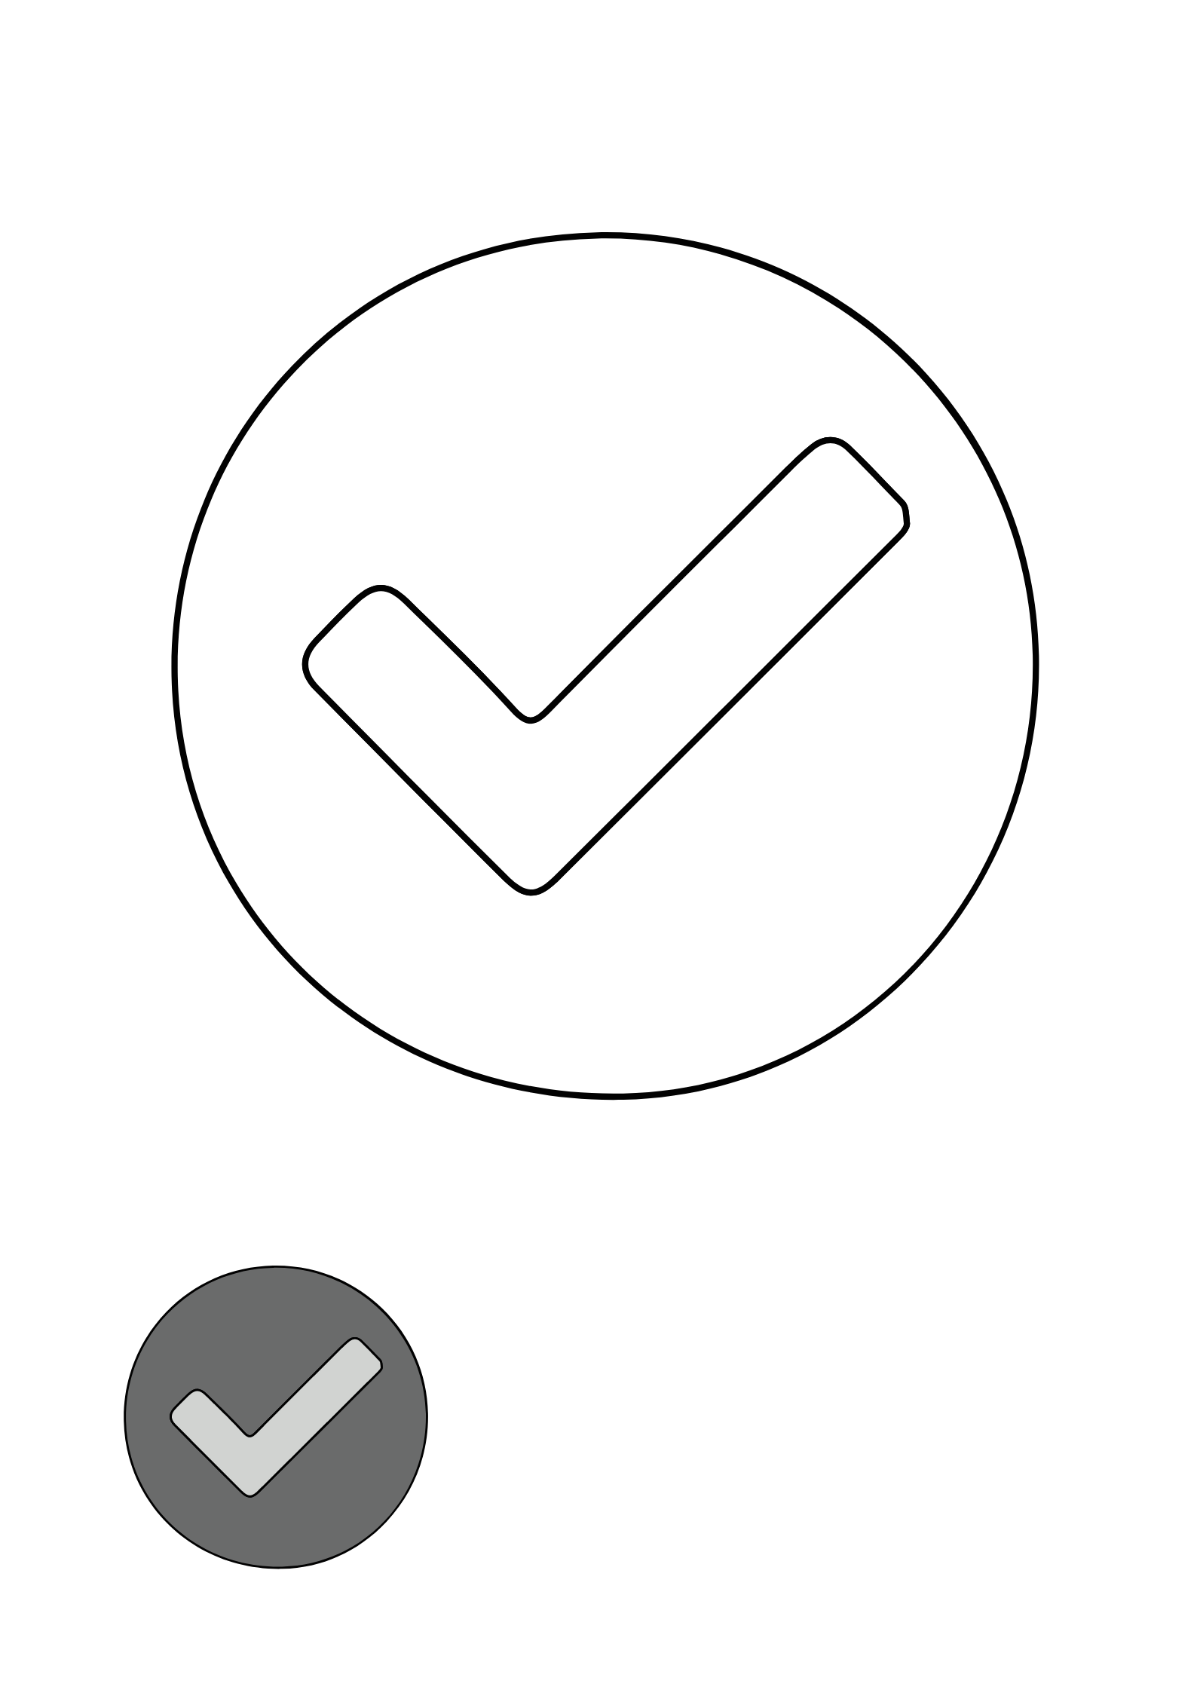 Grey Check Mark coloring page Template